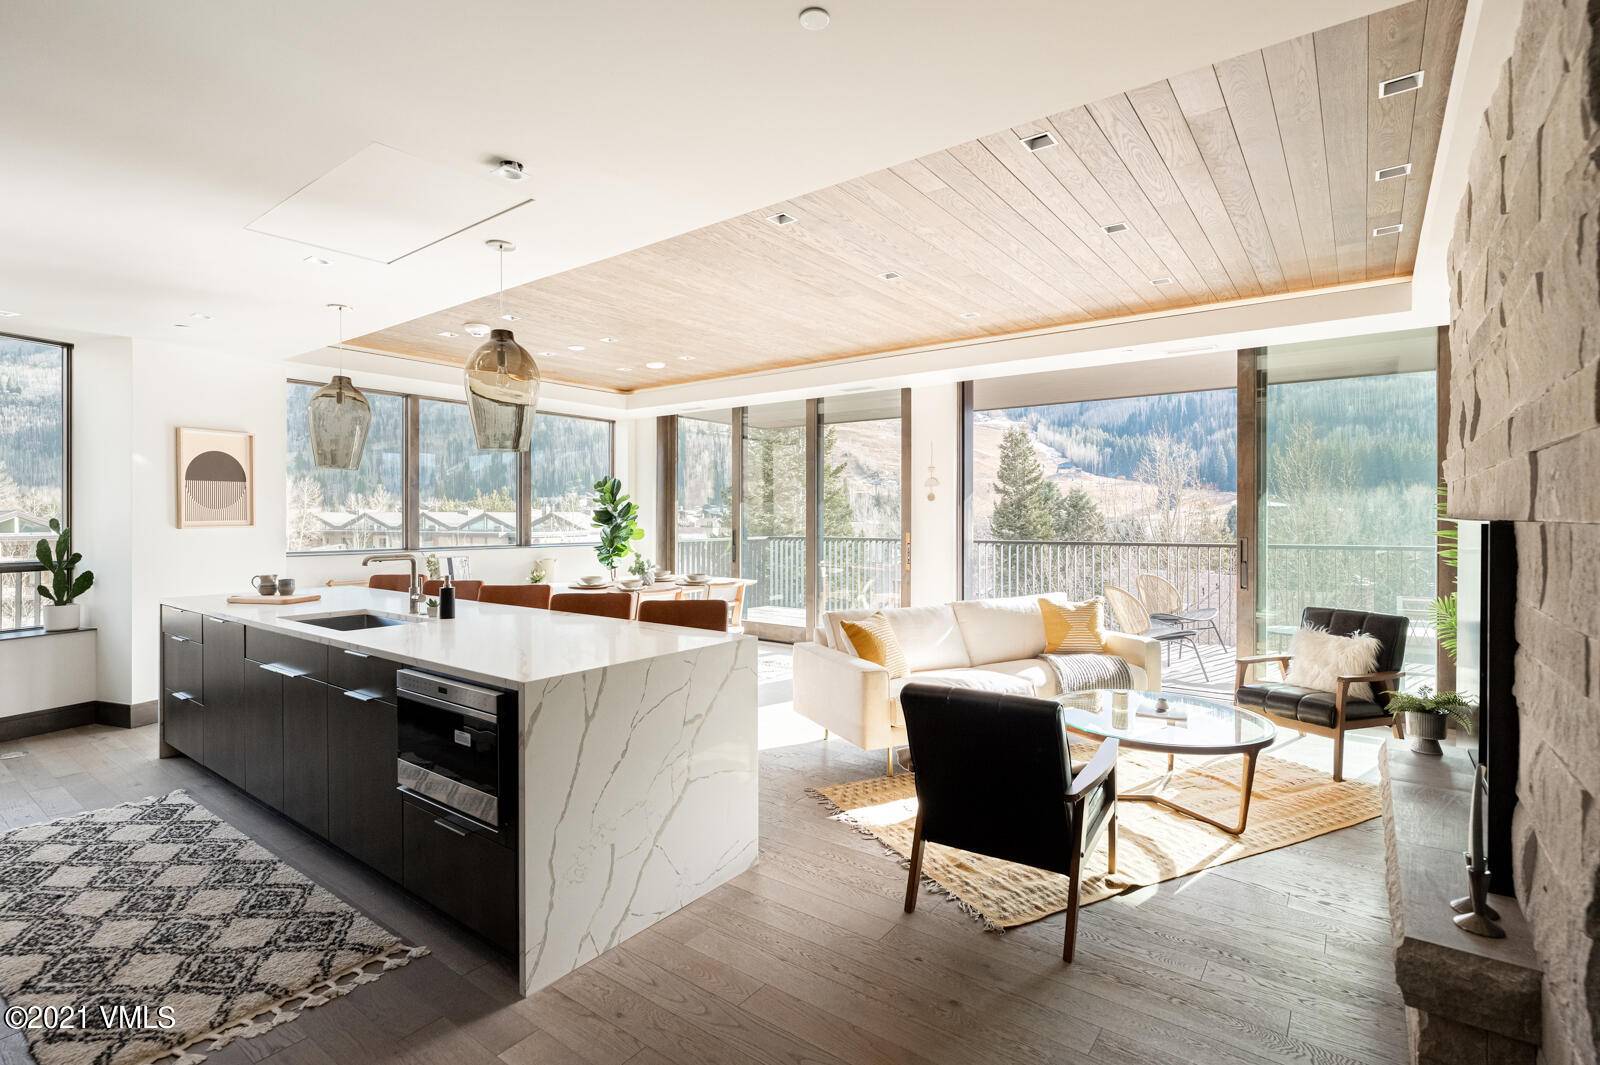 Altus Vail sets the new standard for mountain home living in Vail.